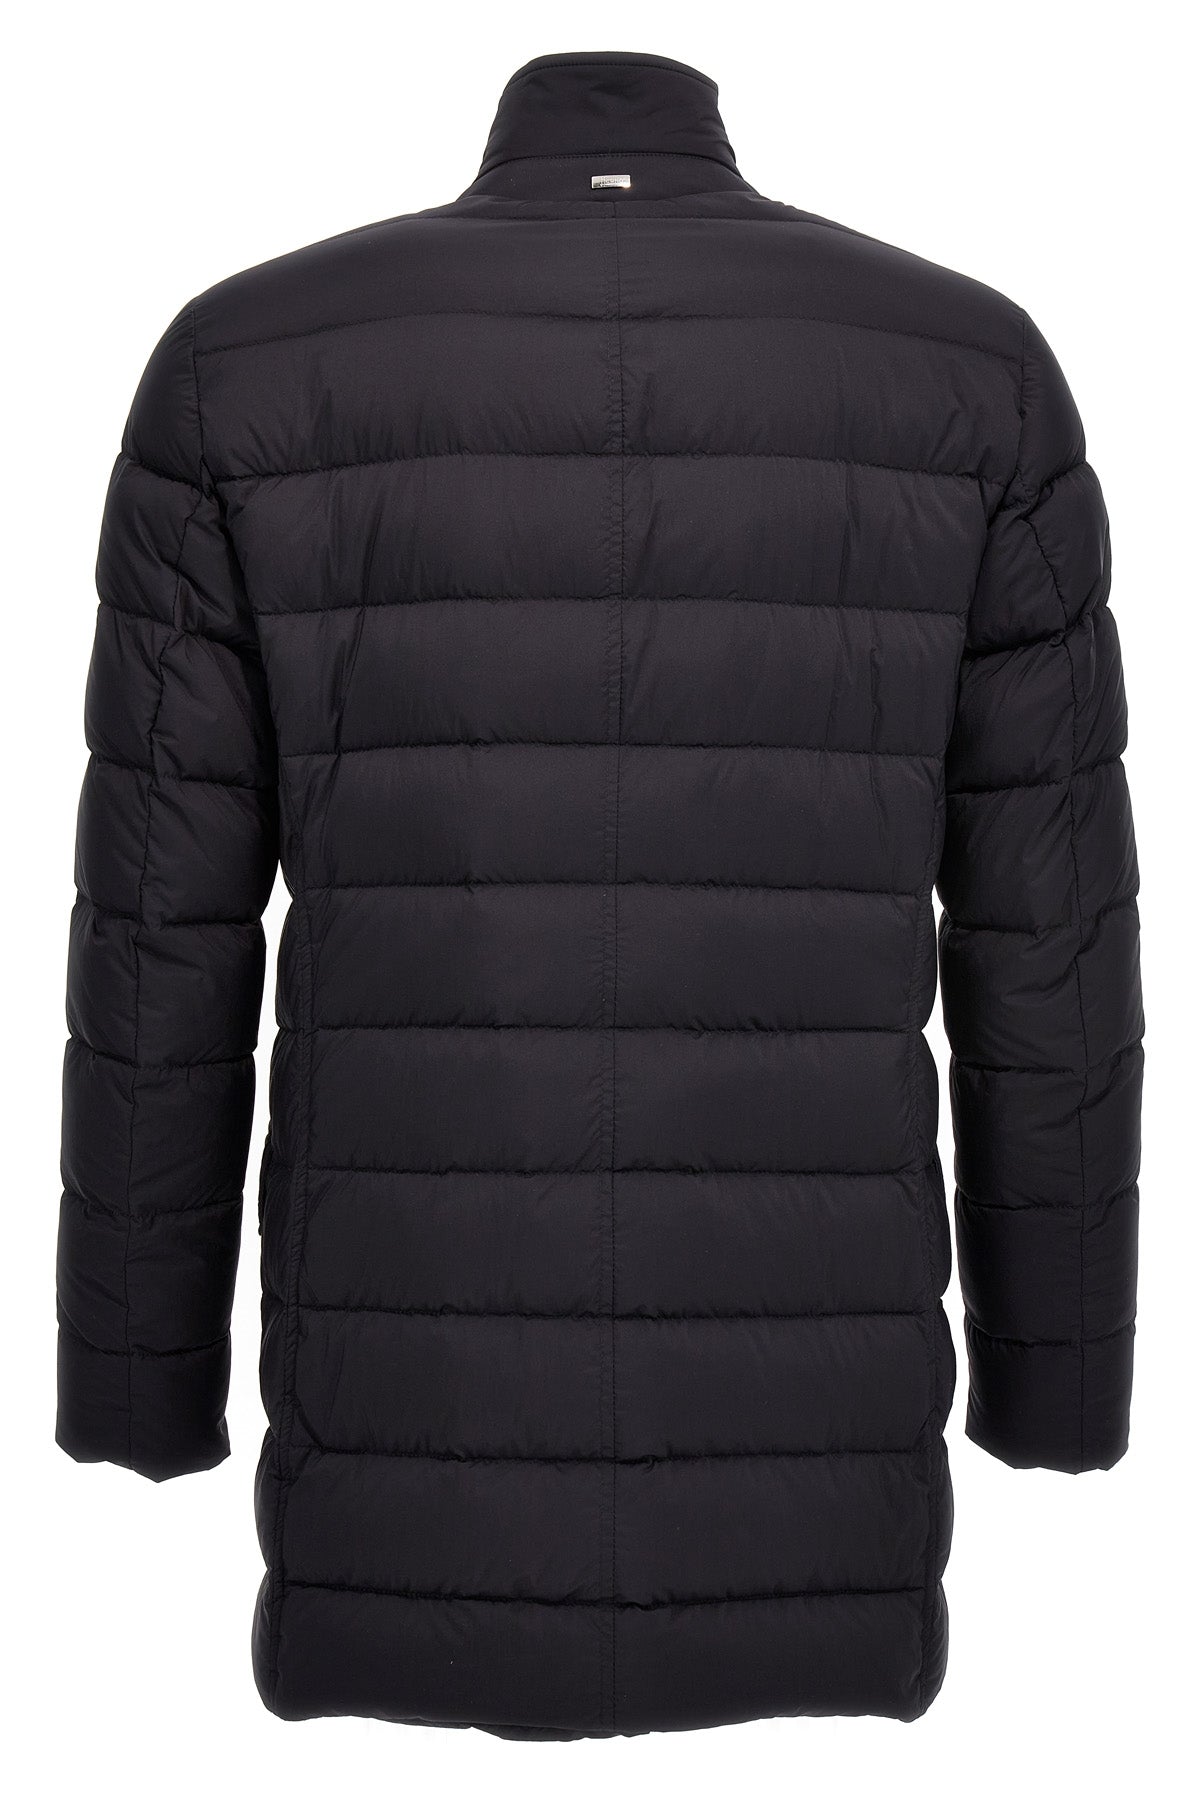 HERNO 'IL CAPPOTTO' PUFFER JACKET